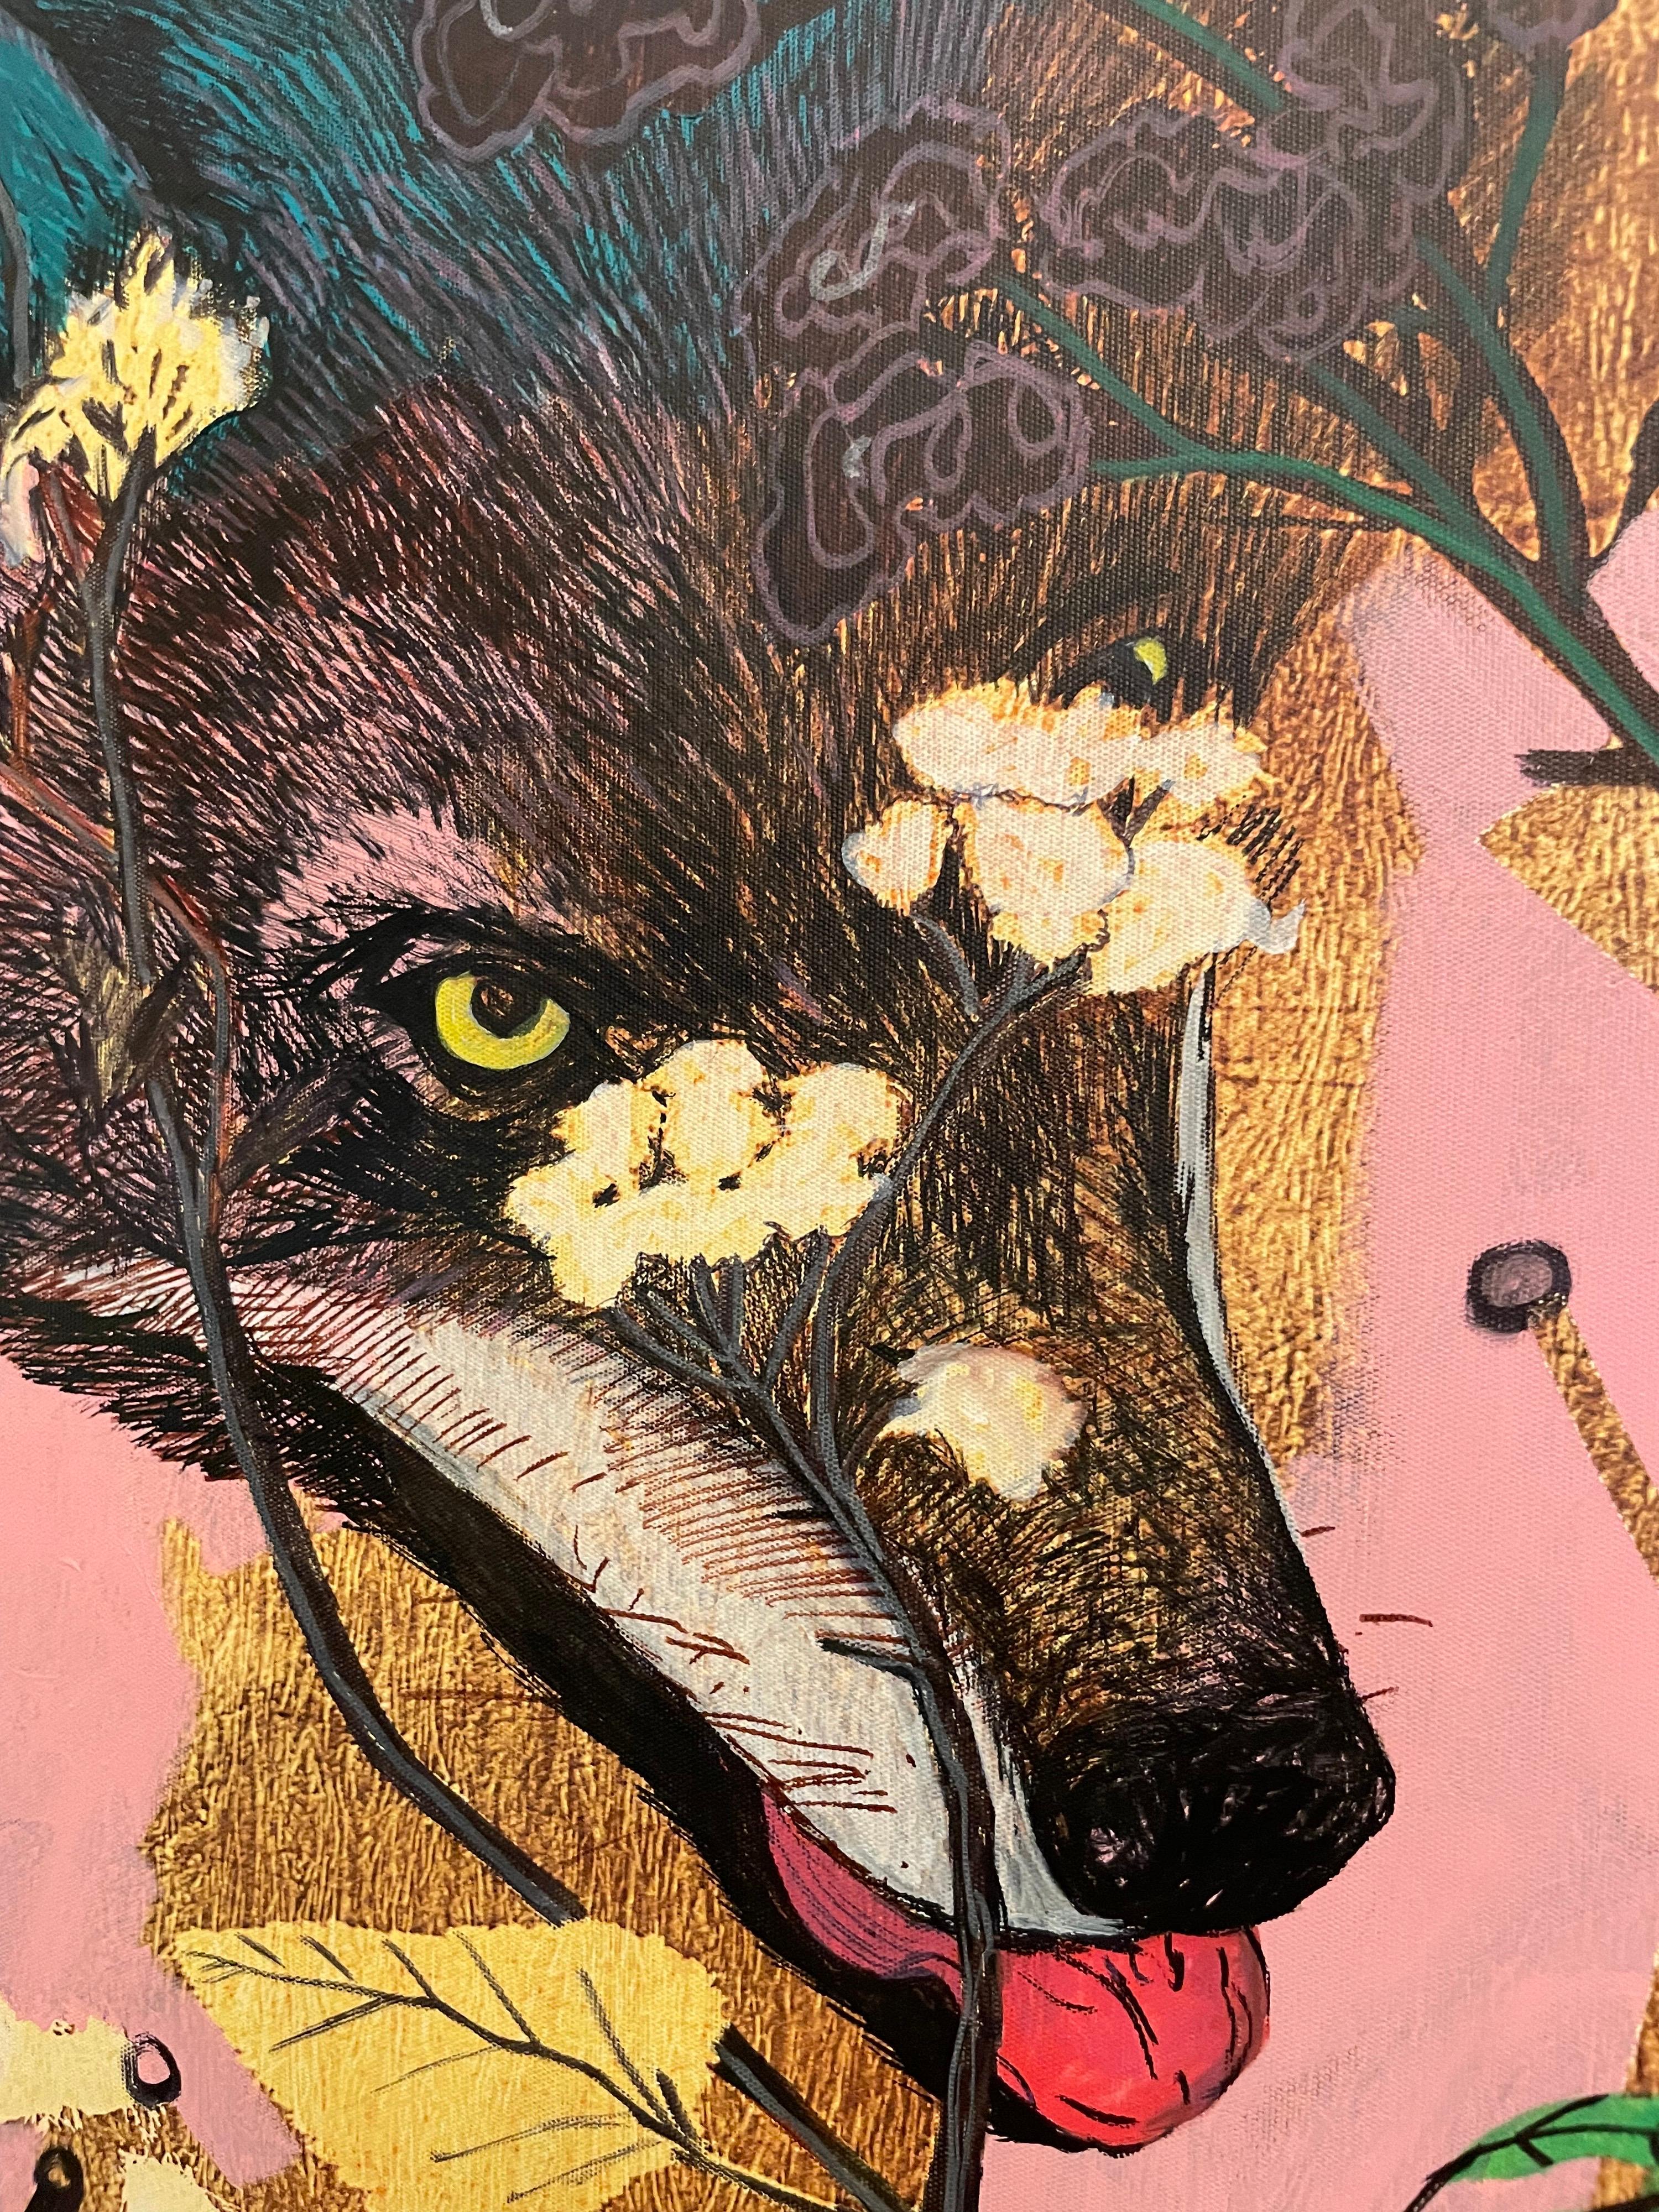 This wonderfully vivid acrylic on canvas painting by Cuban artist, Noel Morera (b. Cuba 1962), depicts the Little Red Riding Hood concept on its head, focusing greatly on the wolf. The translation of his artwork is the wolf is real, little red